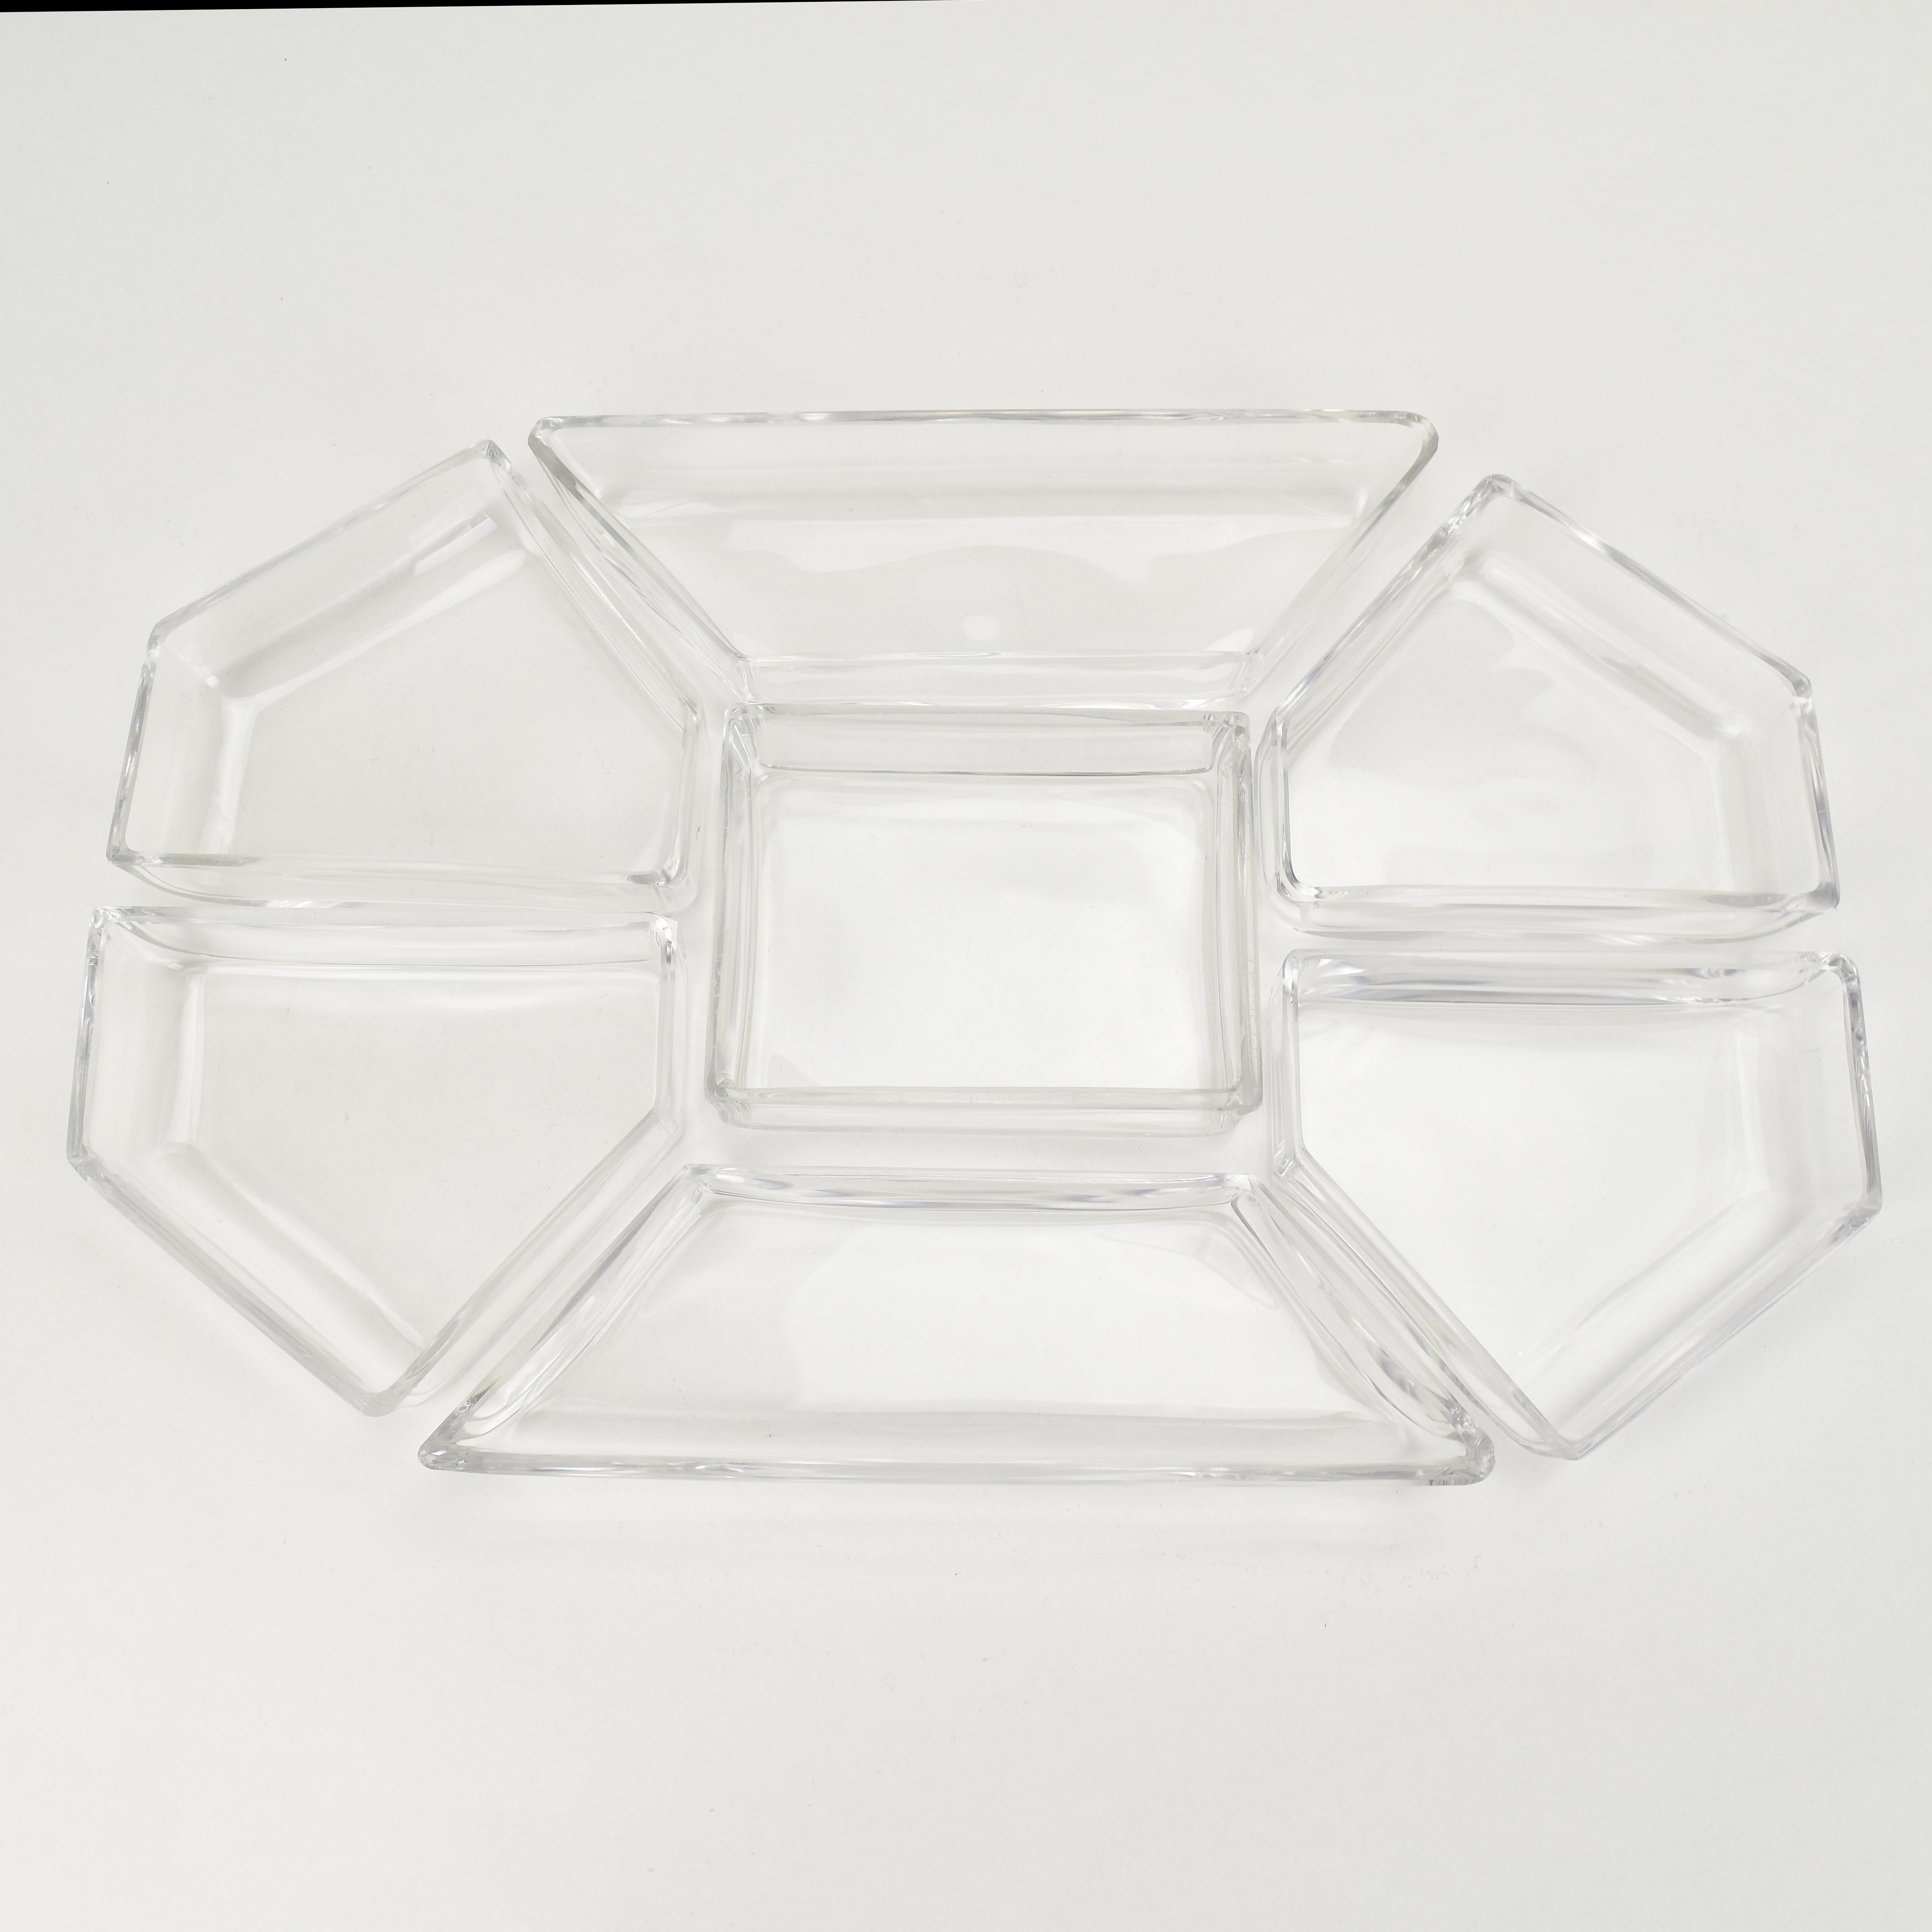 Large Art Deco Cabaret Bar Snack Tray by Quist Silverplate & Cut Crystal Liners For Sale 2